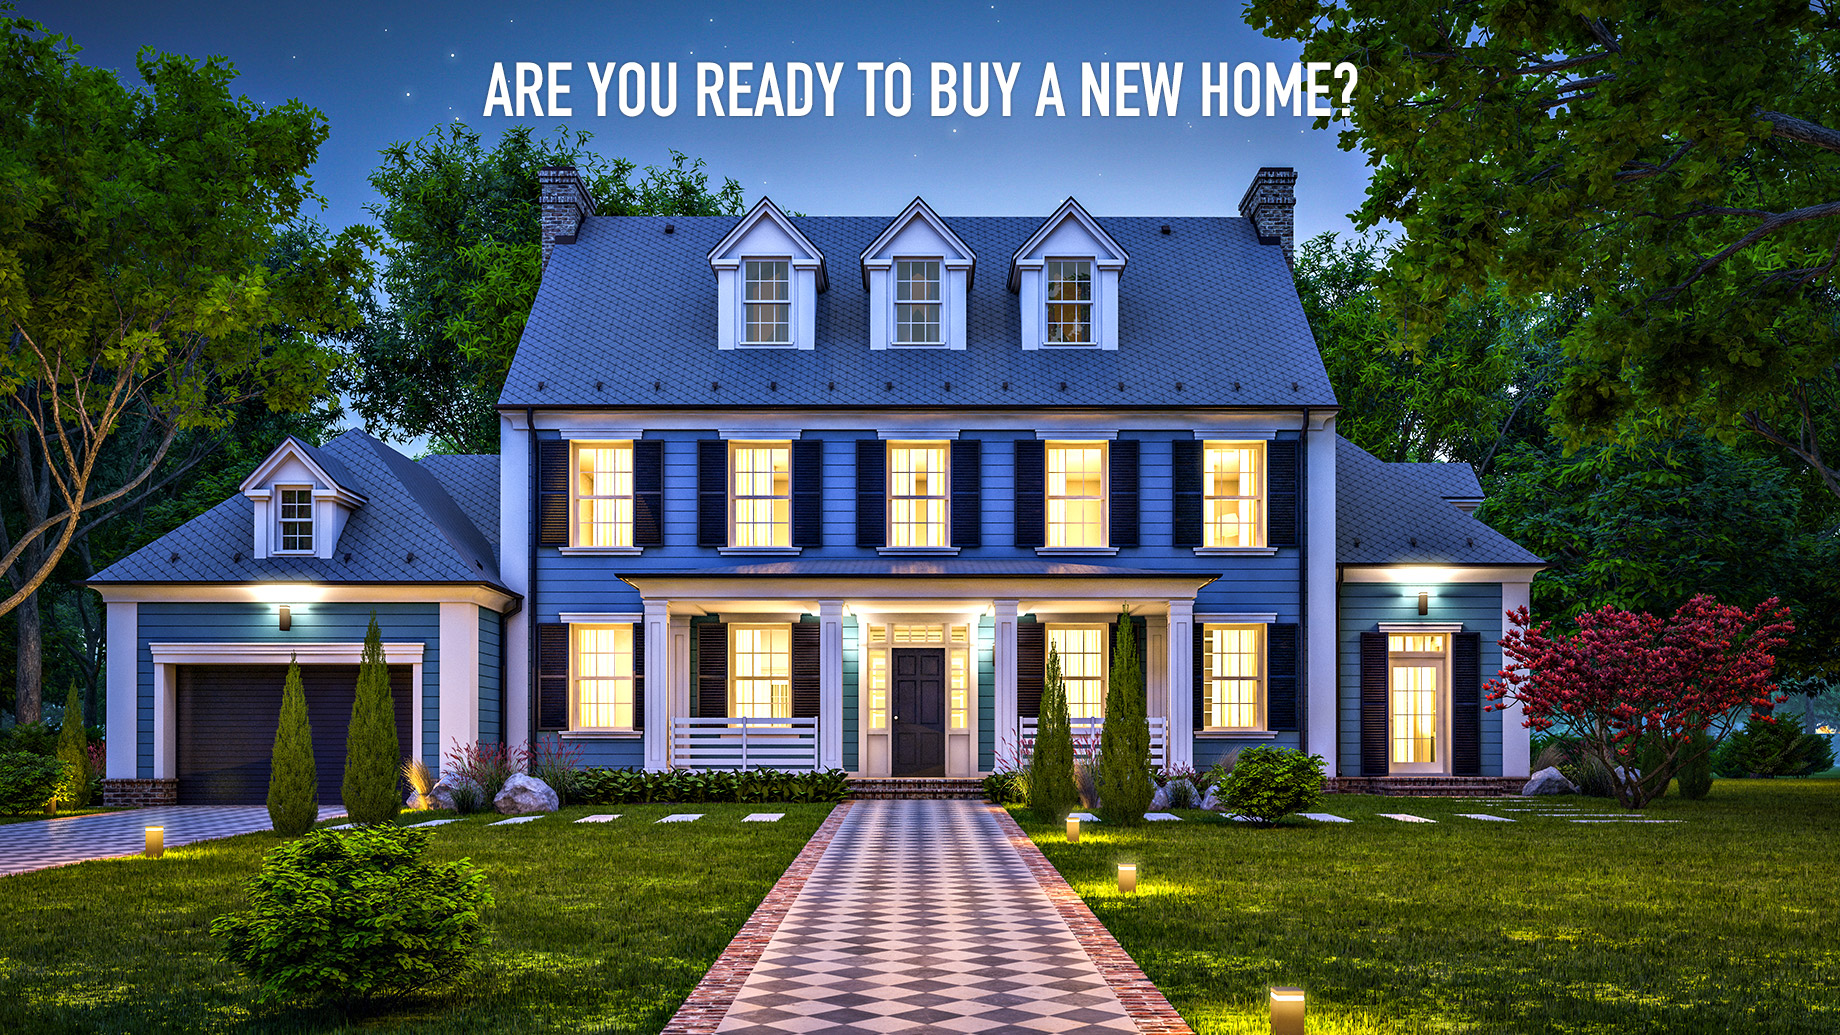 Are You Ready To Buy A New Home? Here Are 3 Signs That Say Yes